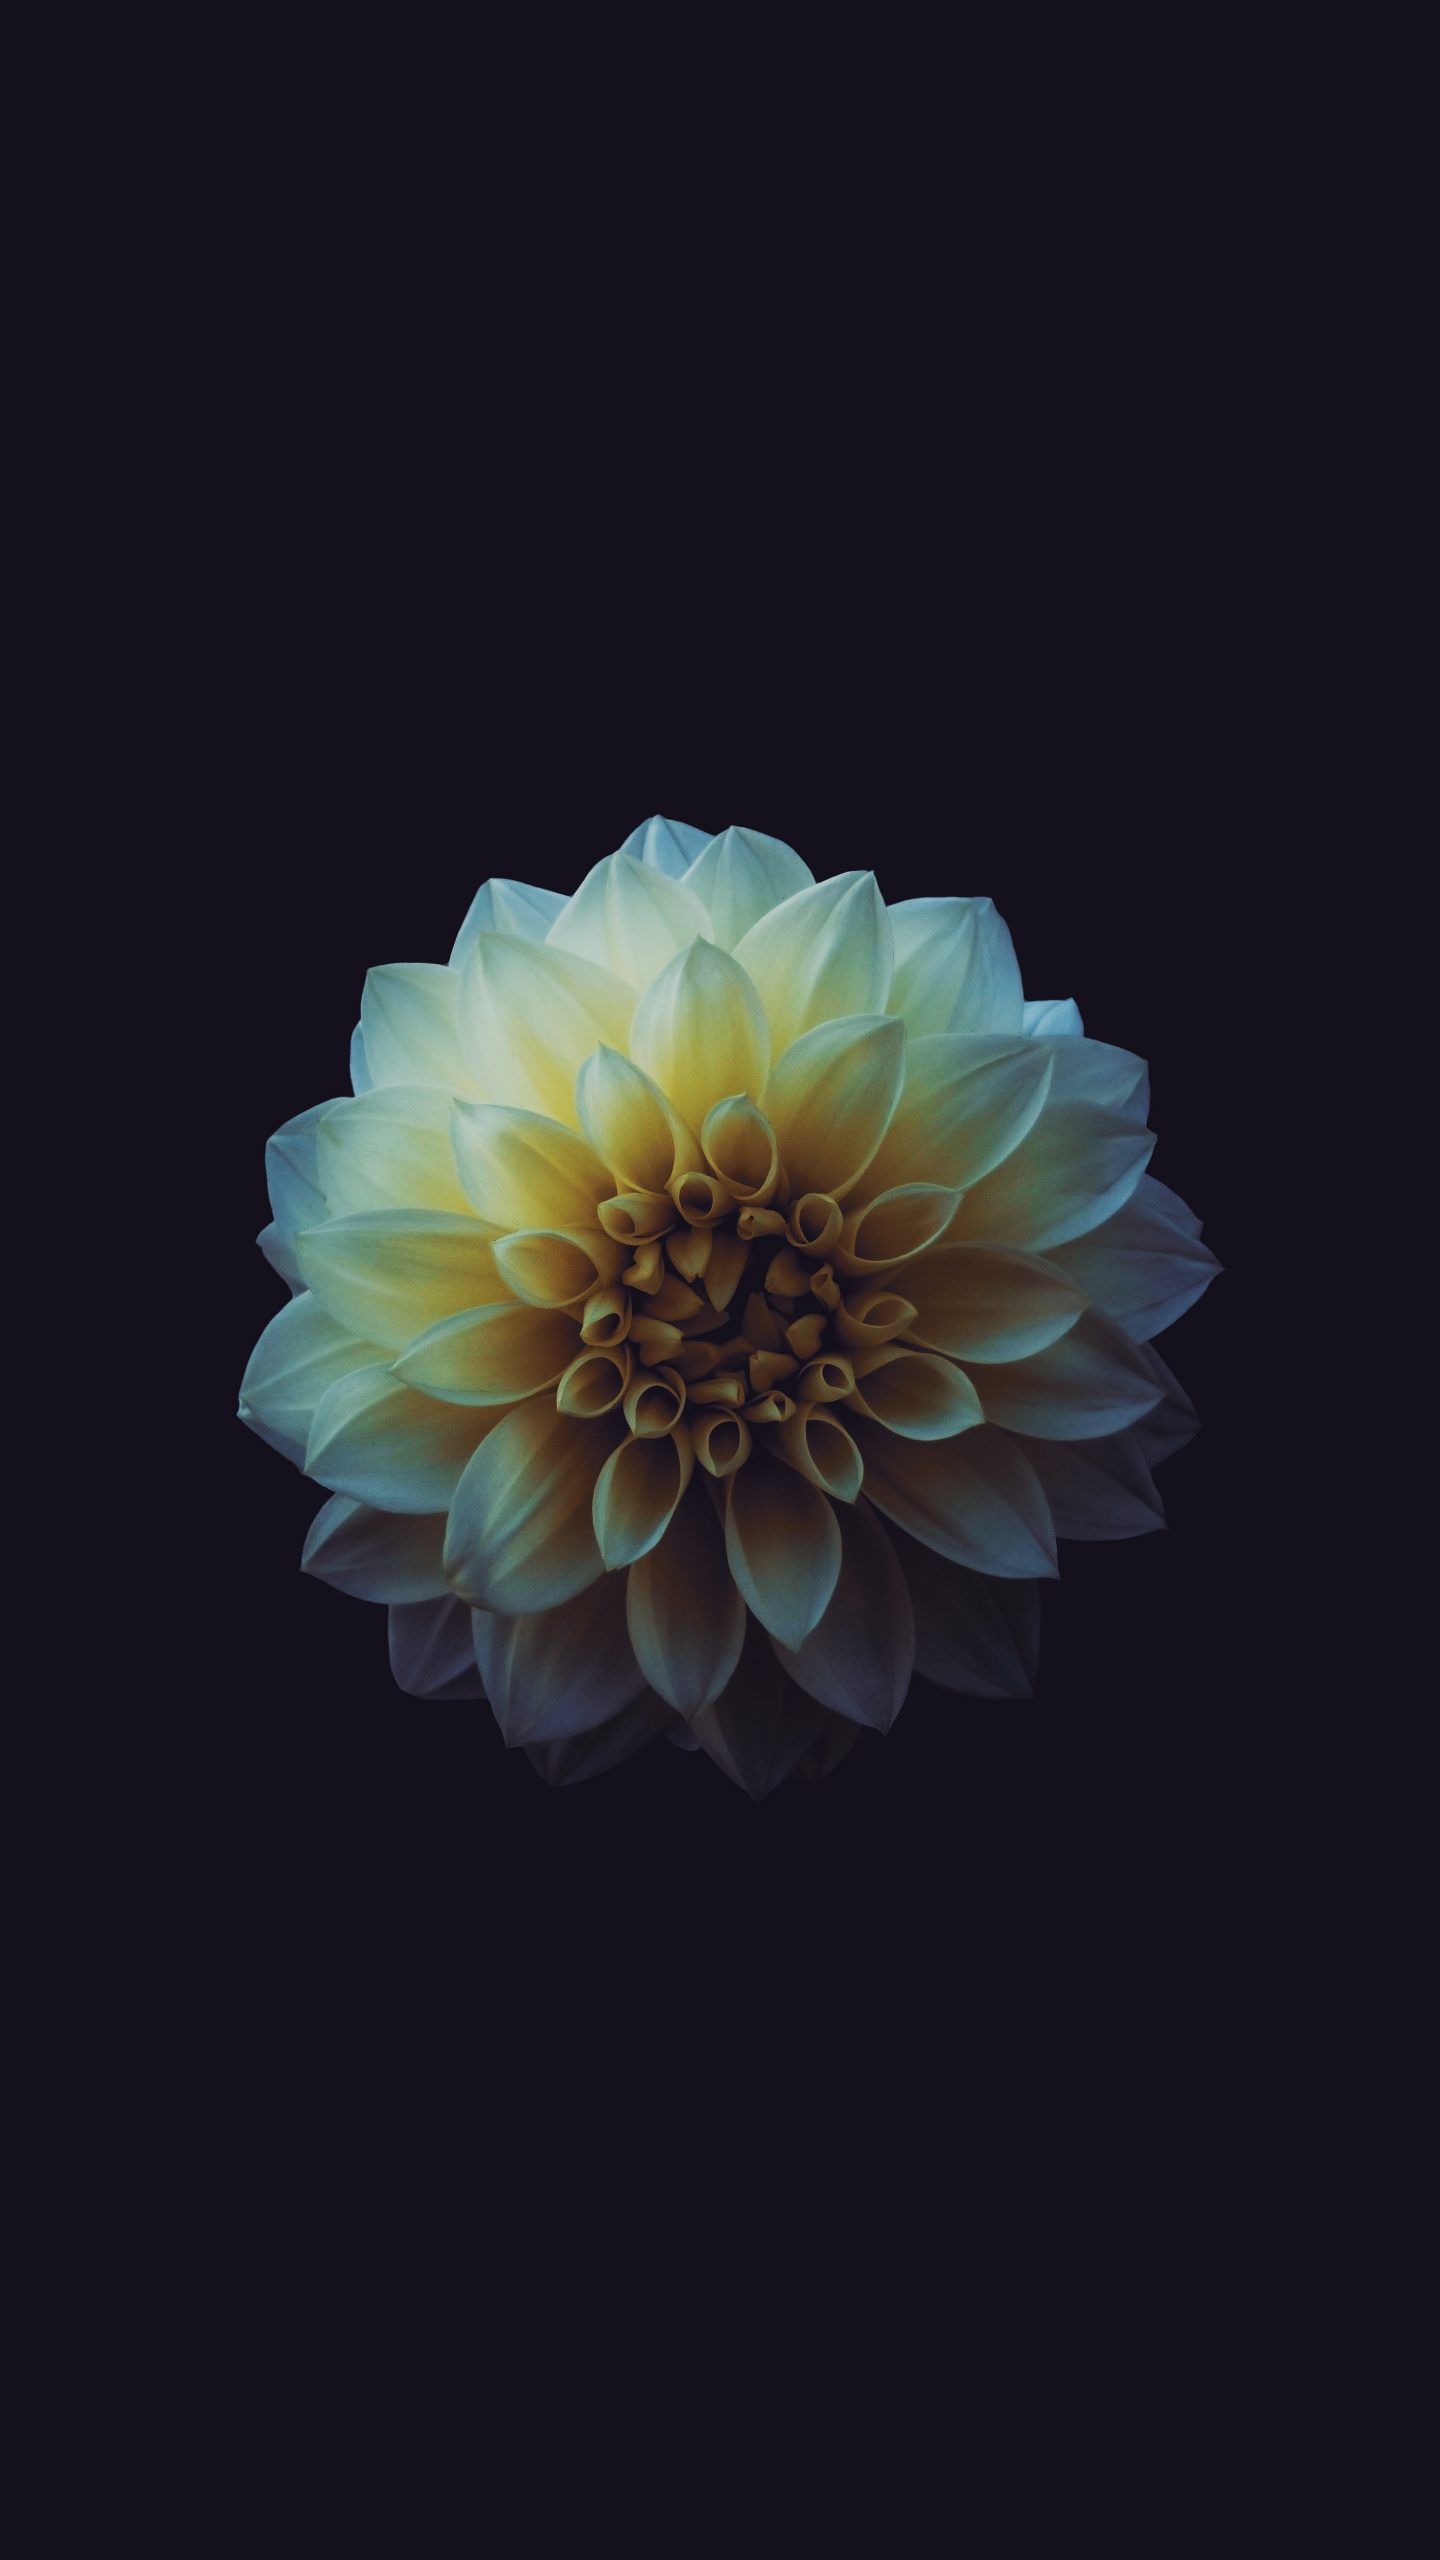 A close up of the flower on black background - IPhone, dark phone, black phone